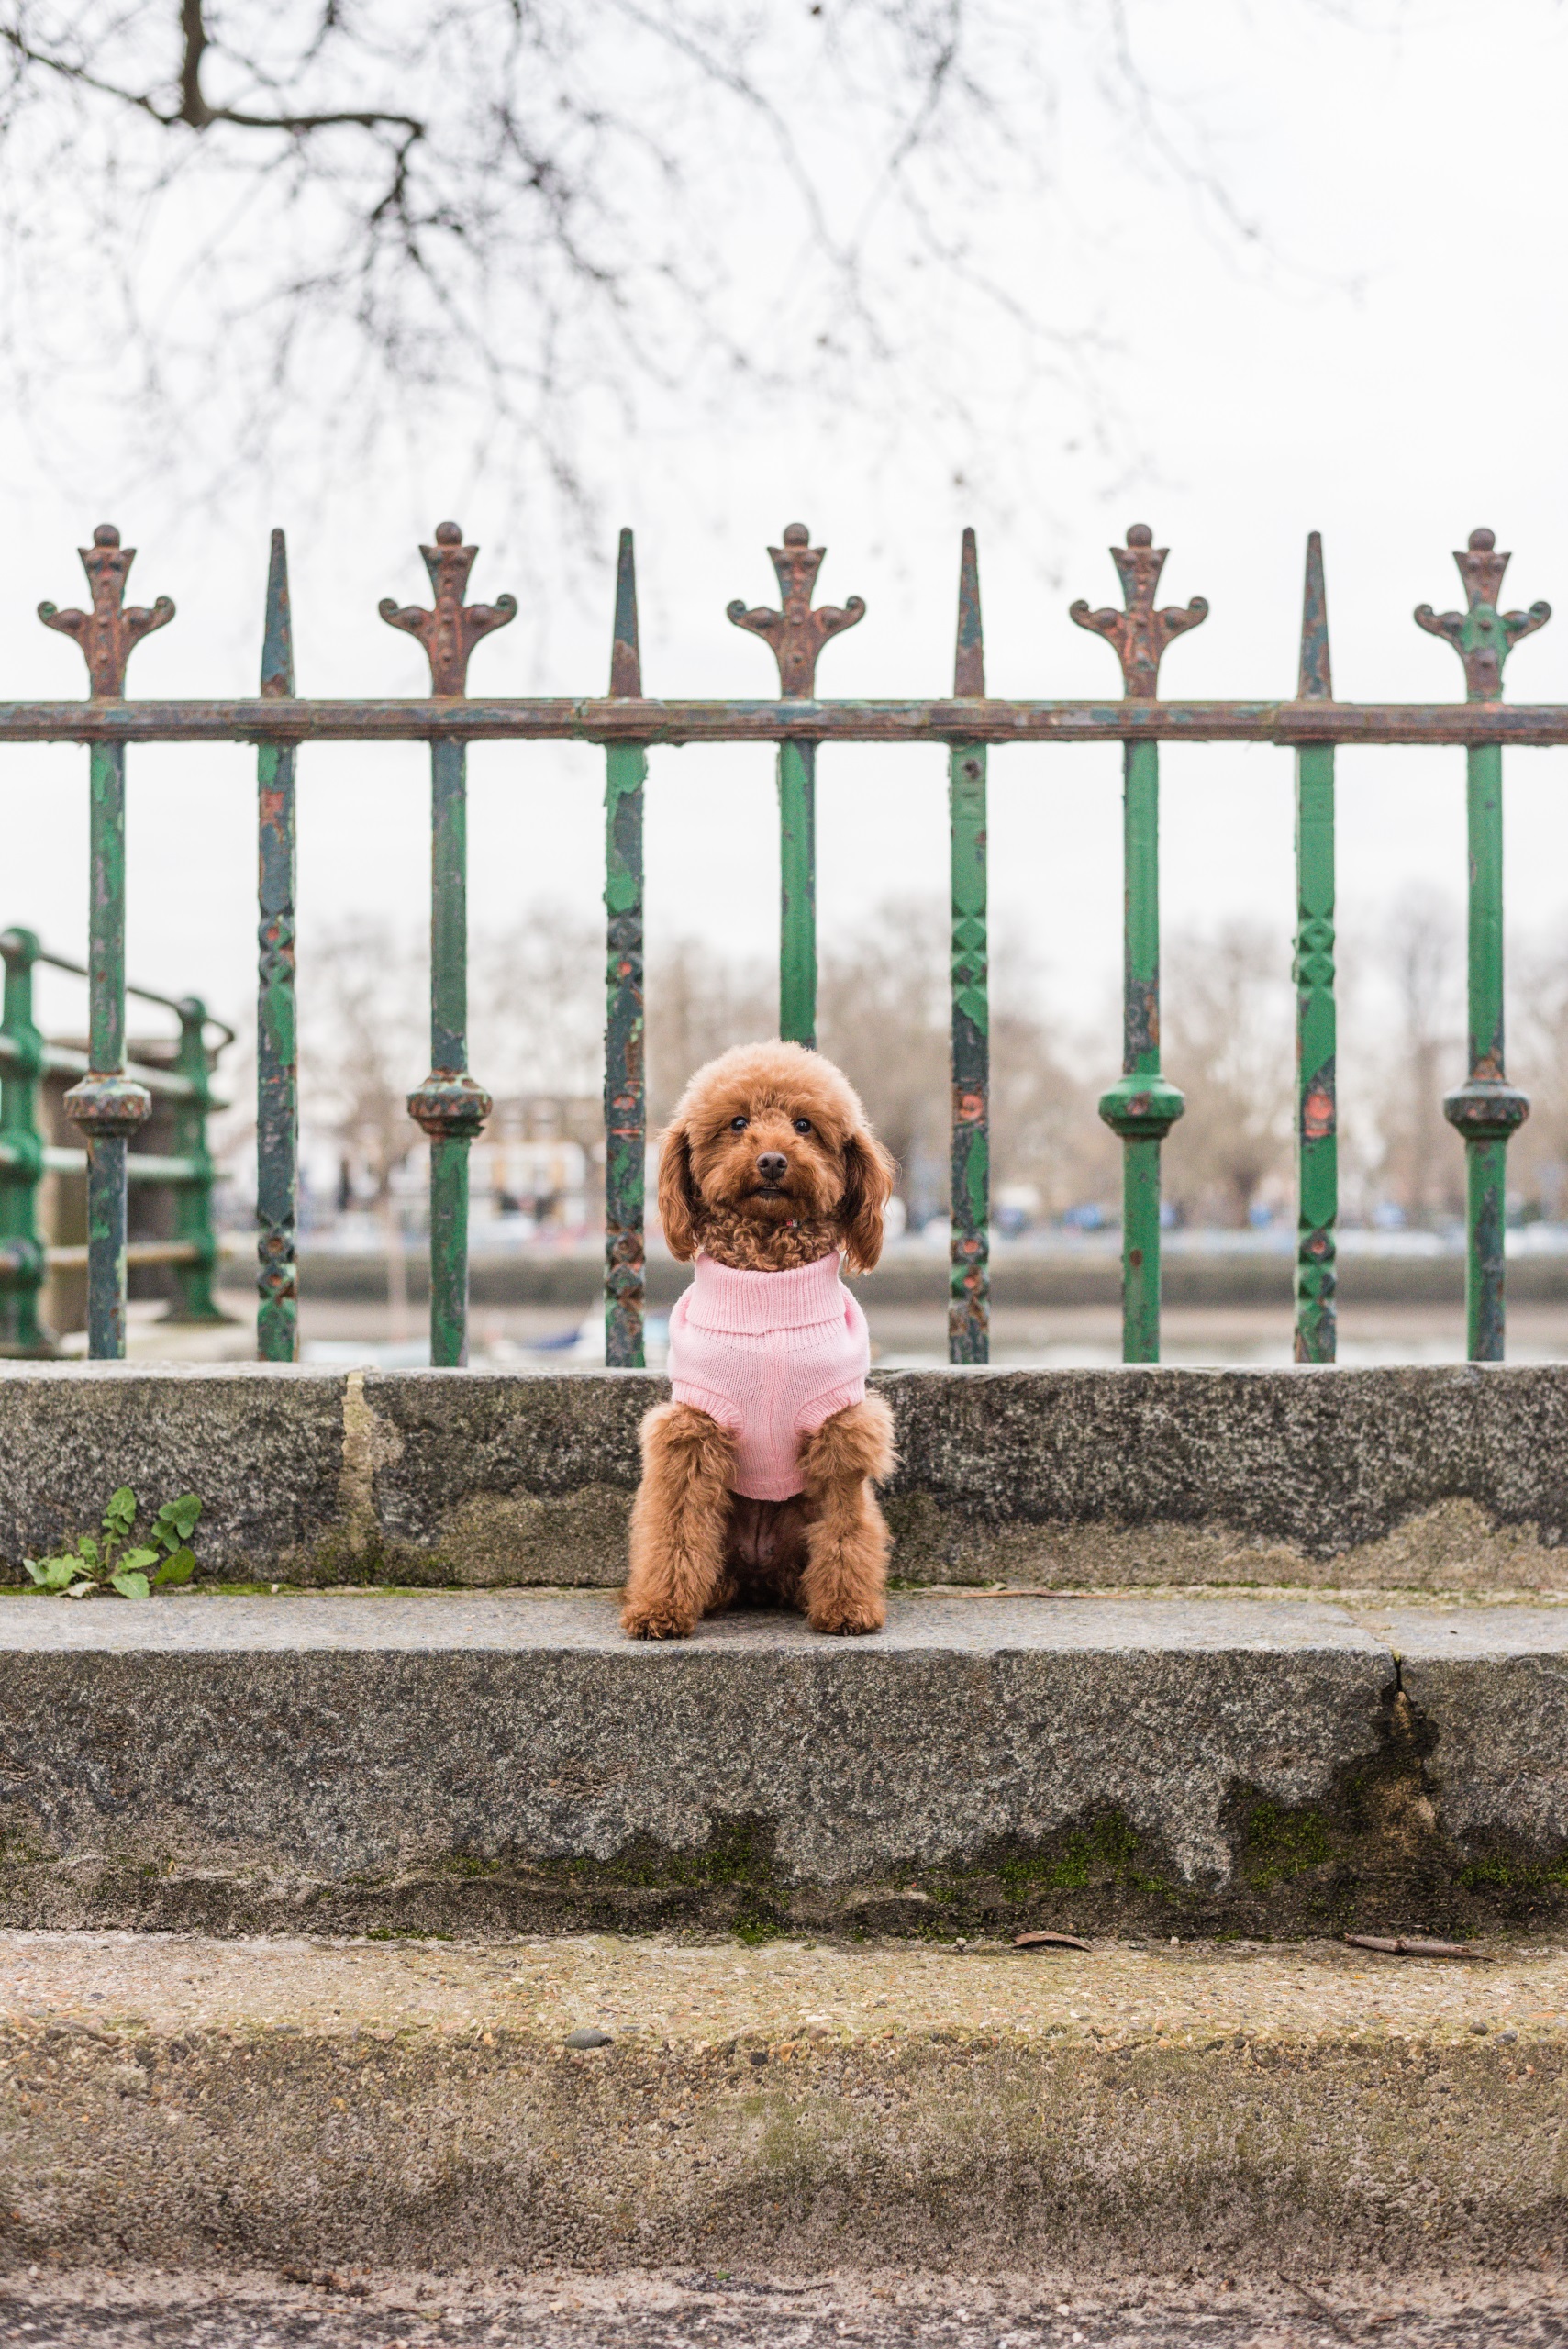 Measuring up your pooch for a cable knit sweater